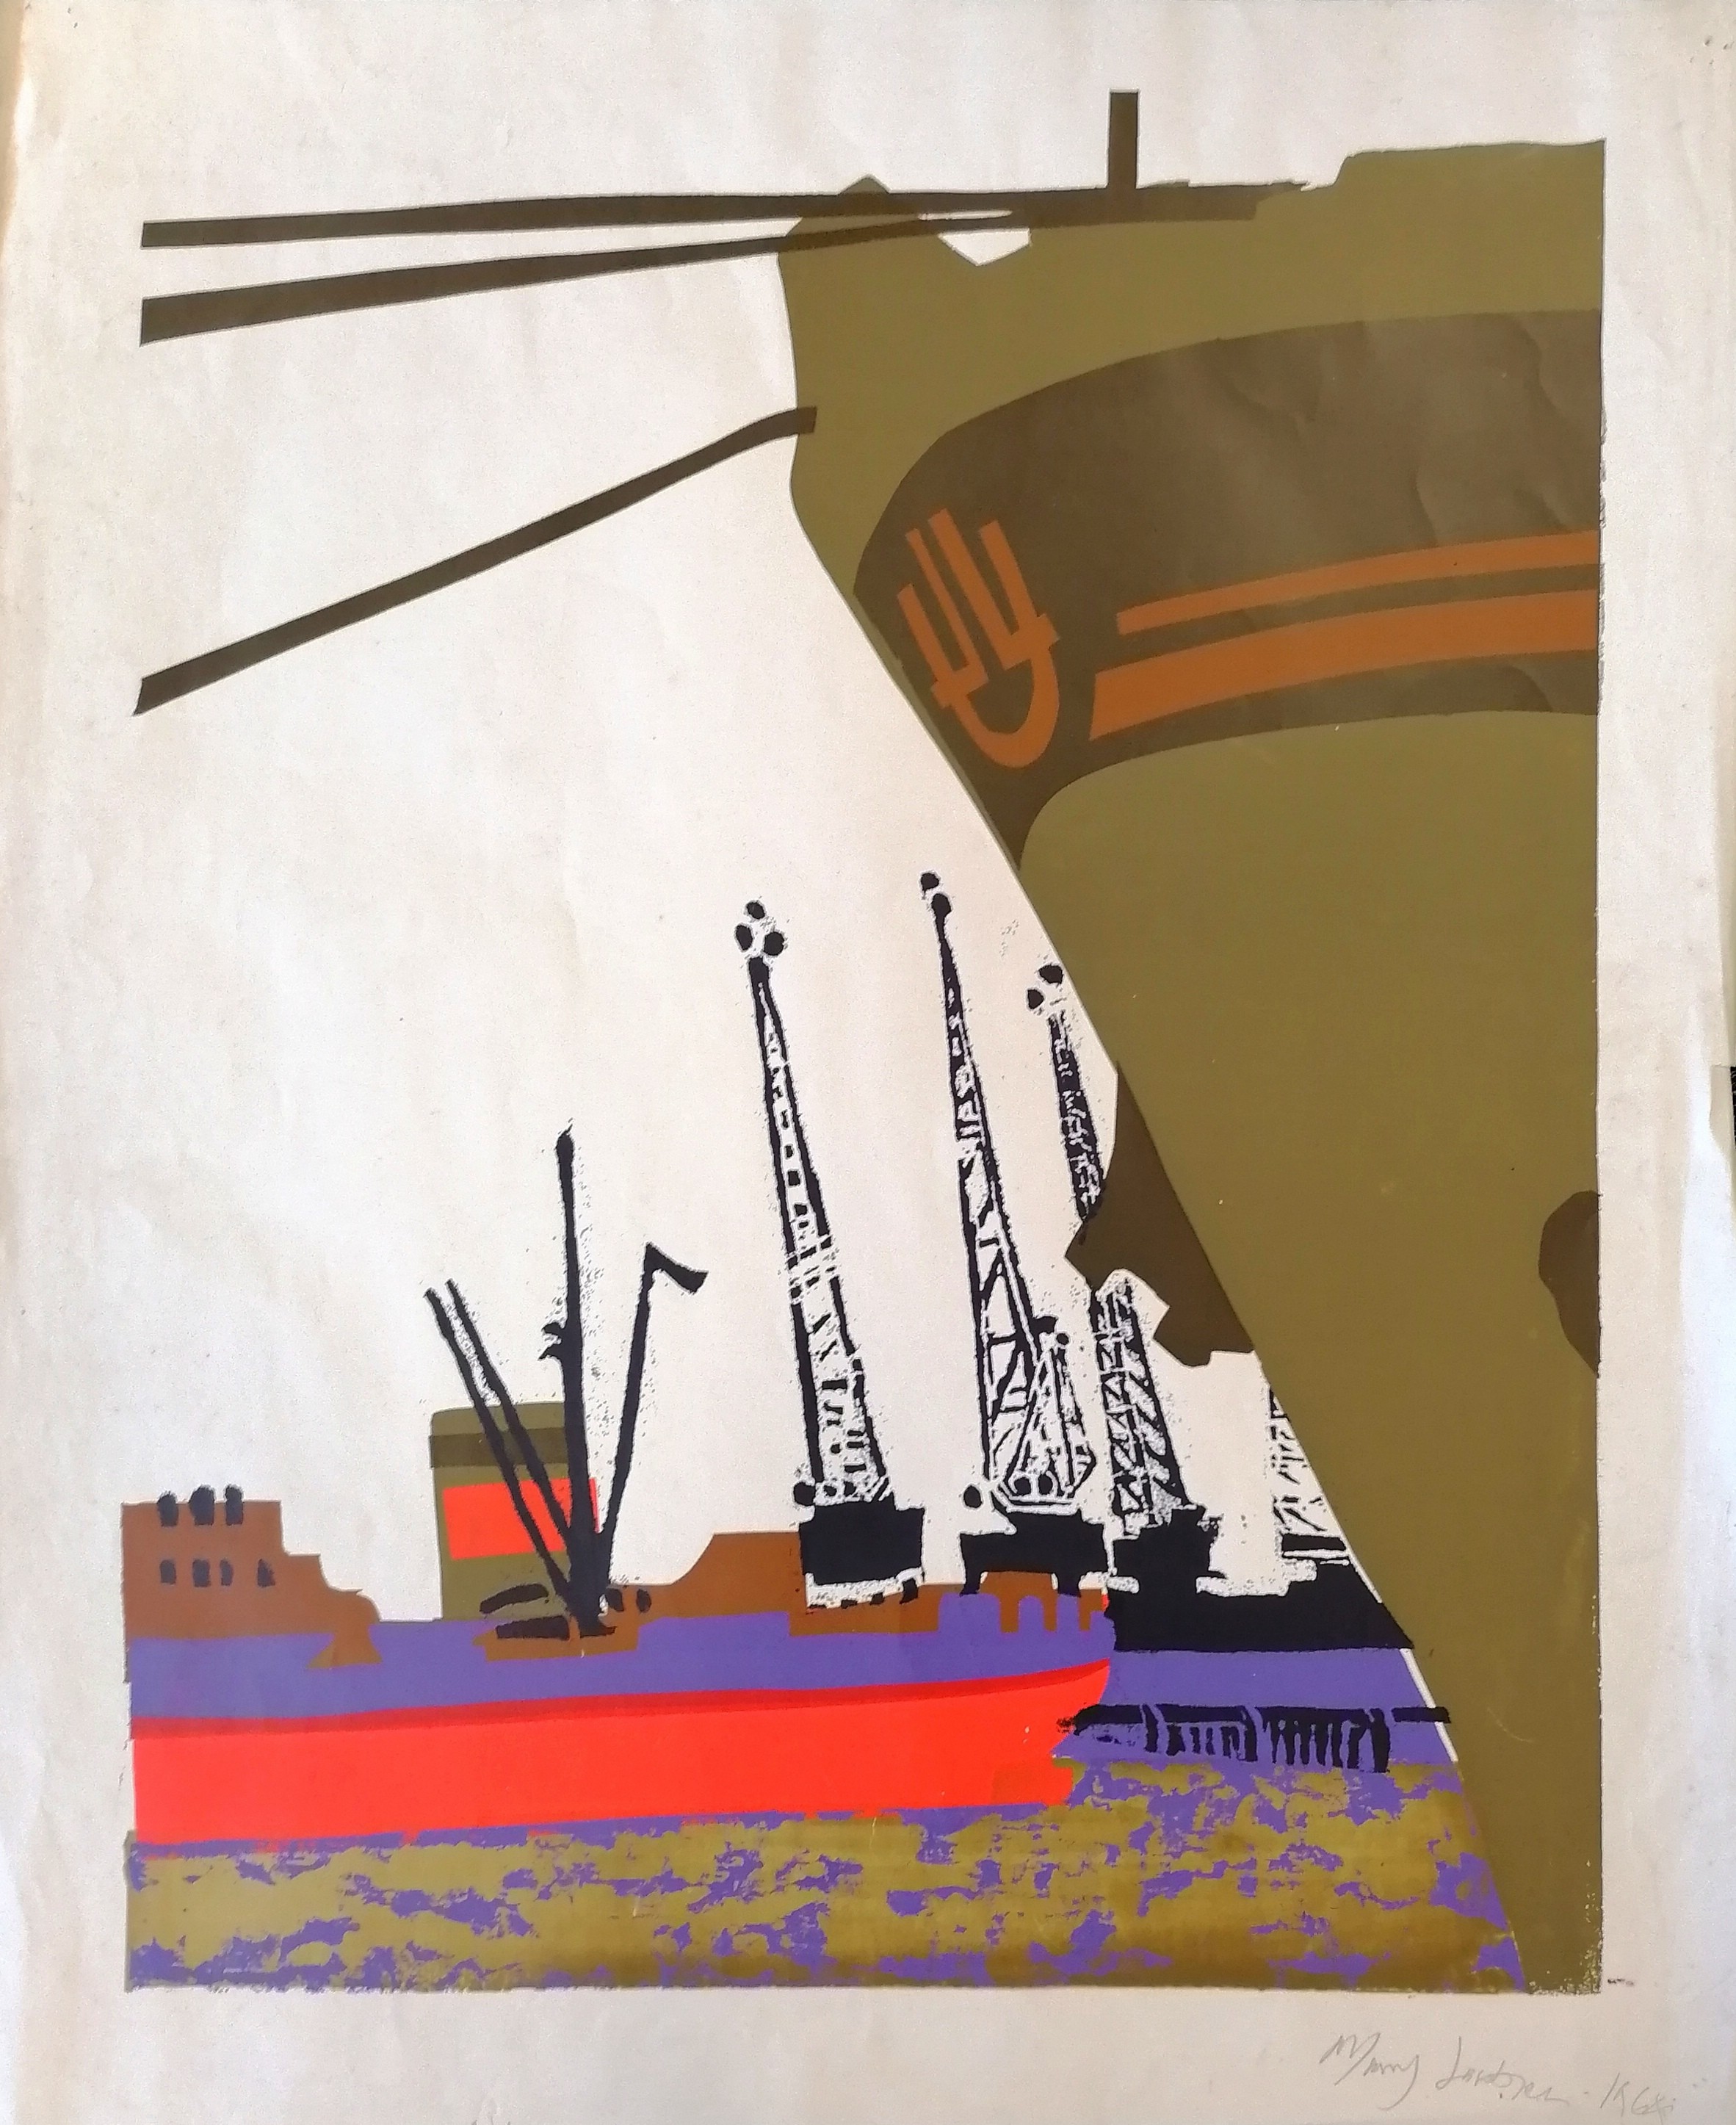 Mary Jacobsen (née Futo) 1964 screen print of the London docks signed and dated 63cm x 52cm - some